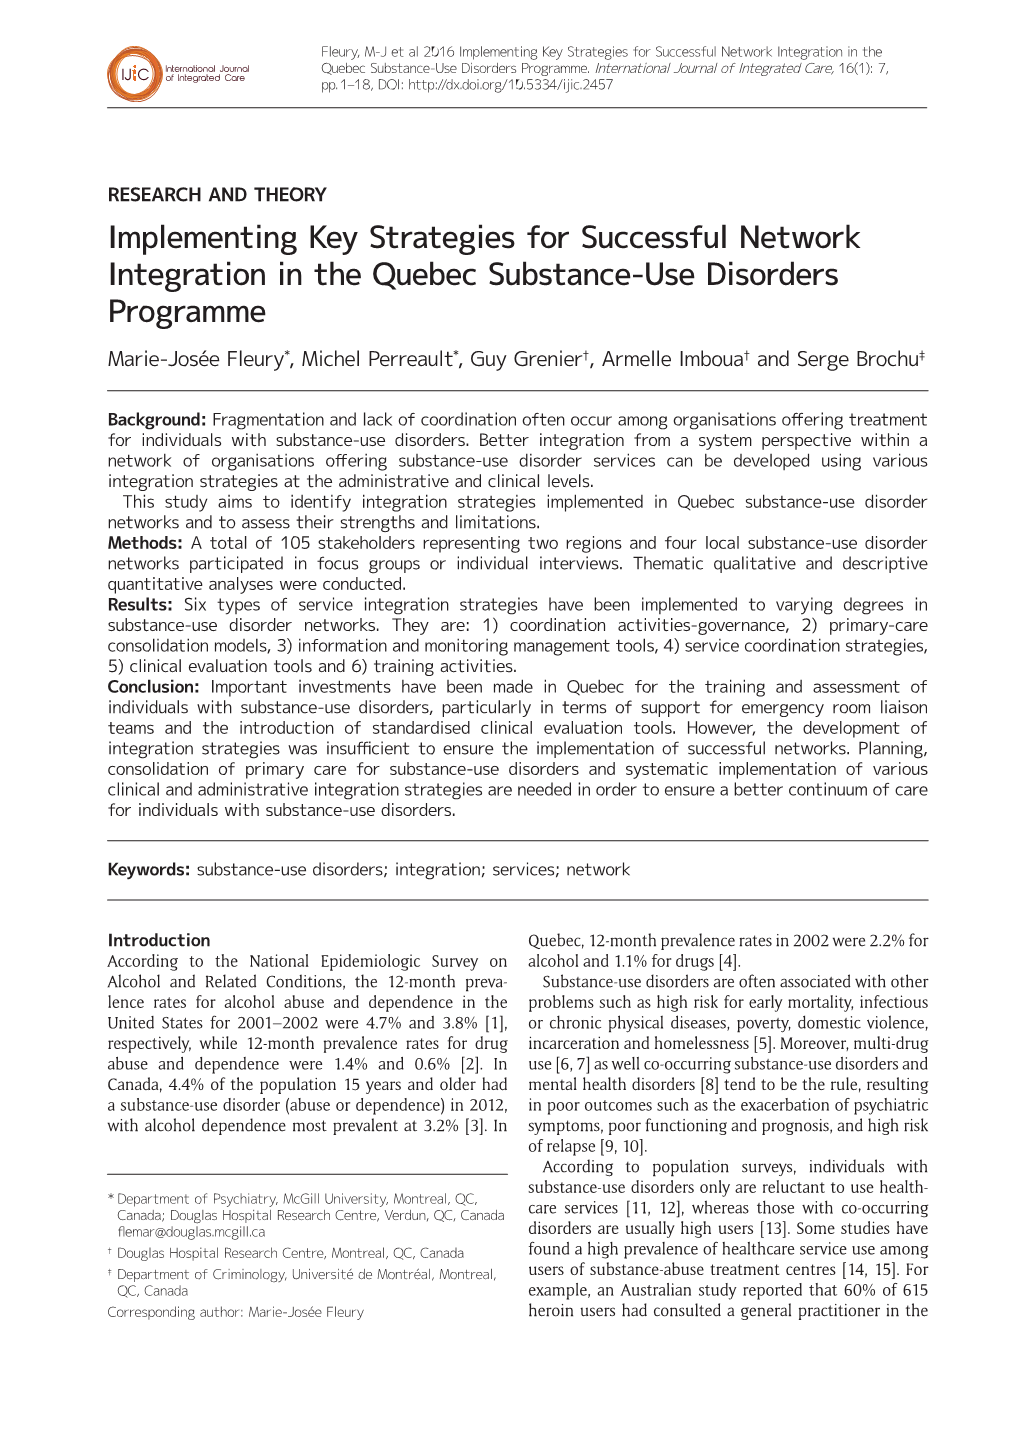 Implementing Key Strategies for Successful Network Integration in the Quebec Substance-Use Disorders Programme